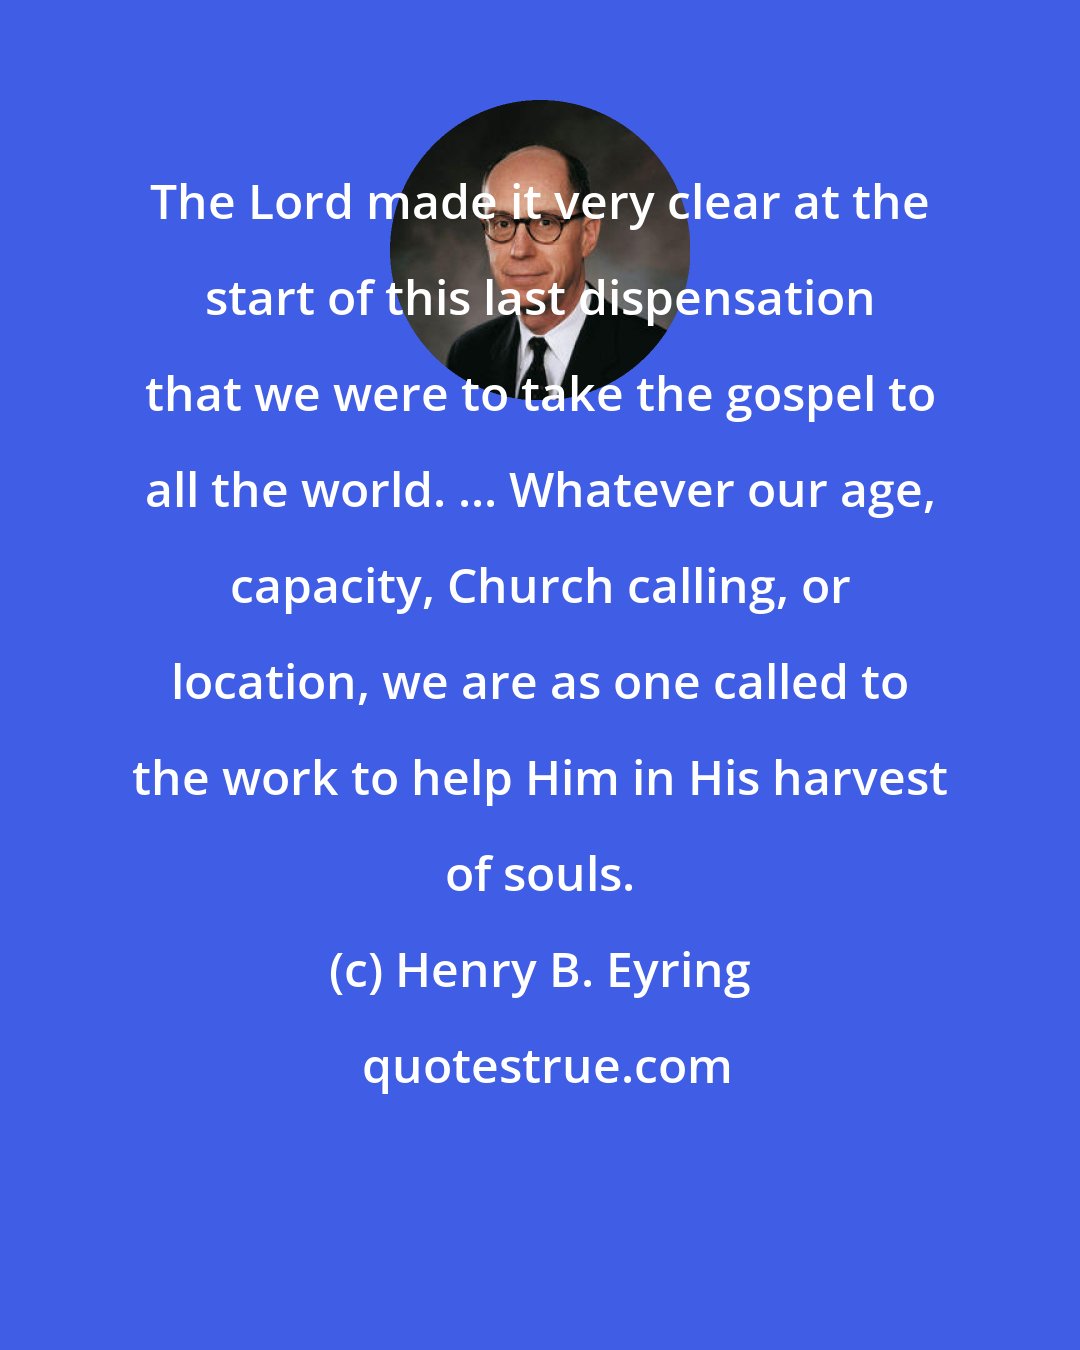 Henry B. Eyring: The Lord made it very clear at the start of this last dispensation that we were to take the gospel to all the world. ... Whatever our age, capacity, Church calling, or location, we are as one called to the work to help Him in His harvest of souls.